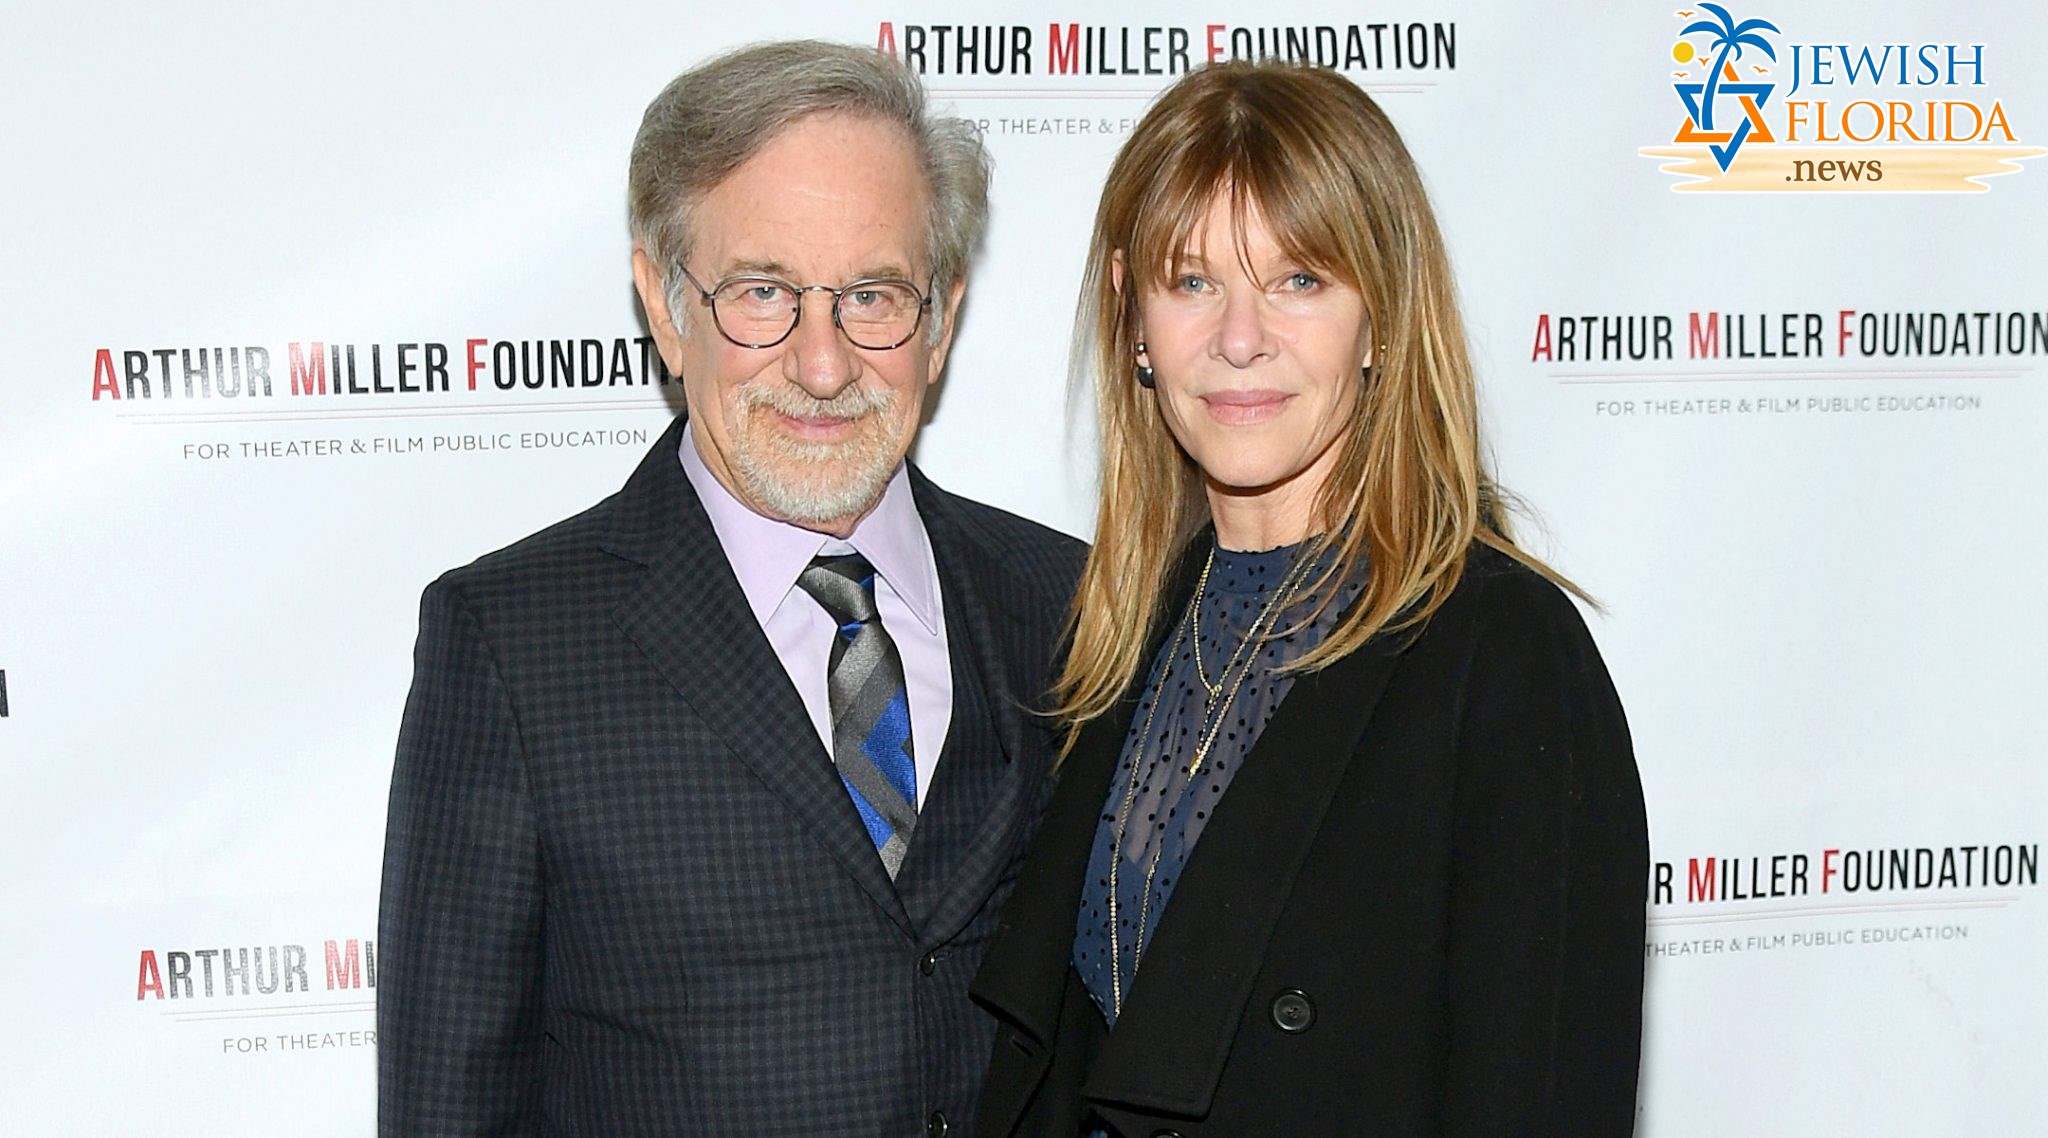 Steven Spielberg launches foundation to fund Jewish-themed documentaries